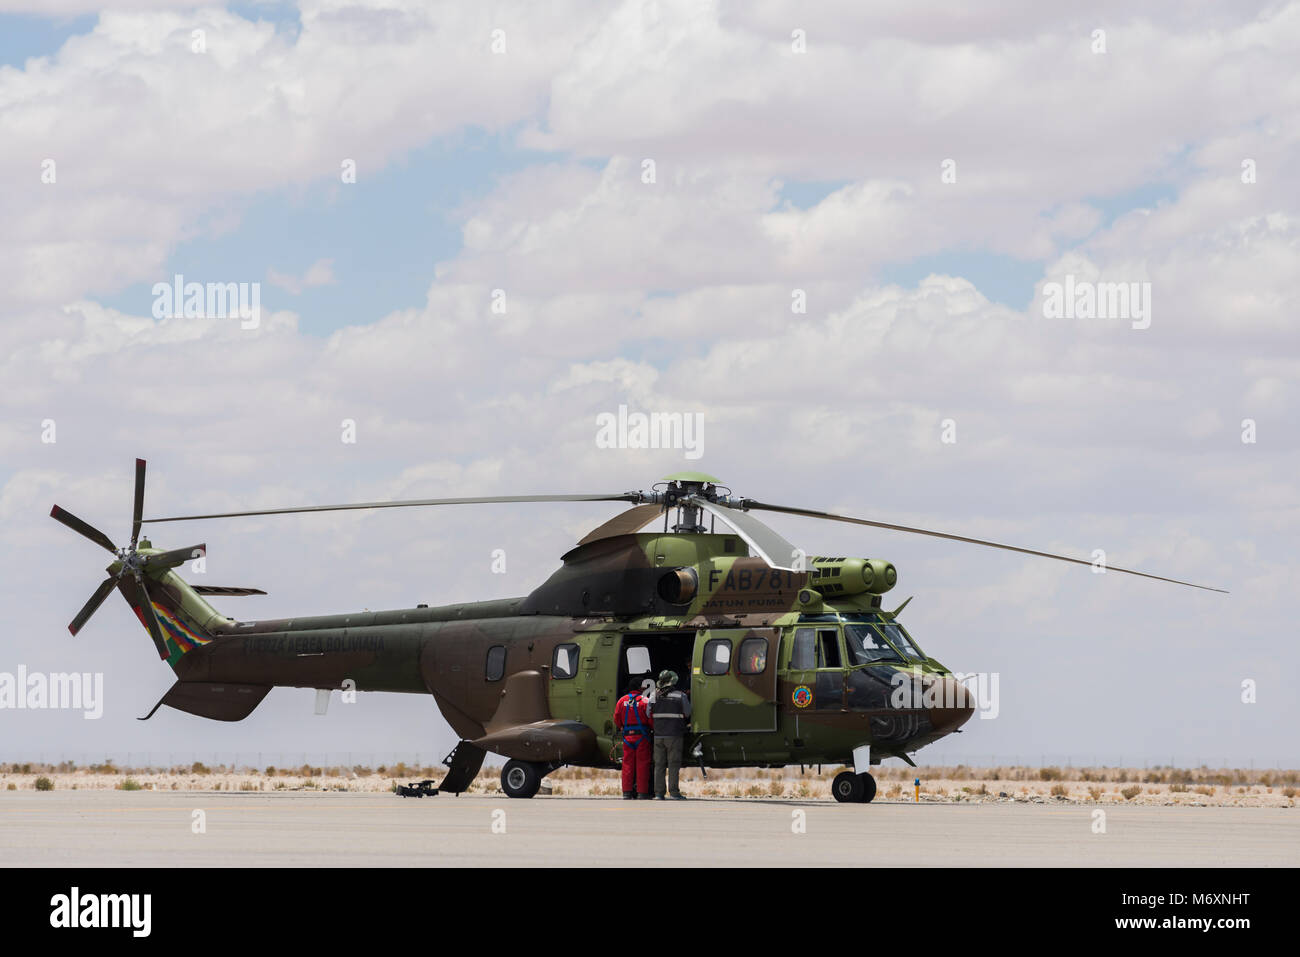 Helicopter Eurocopter AS332 Super Puma with registration FAB-781 at Uyuni Airport Stock Photo